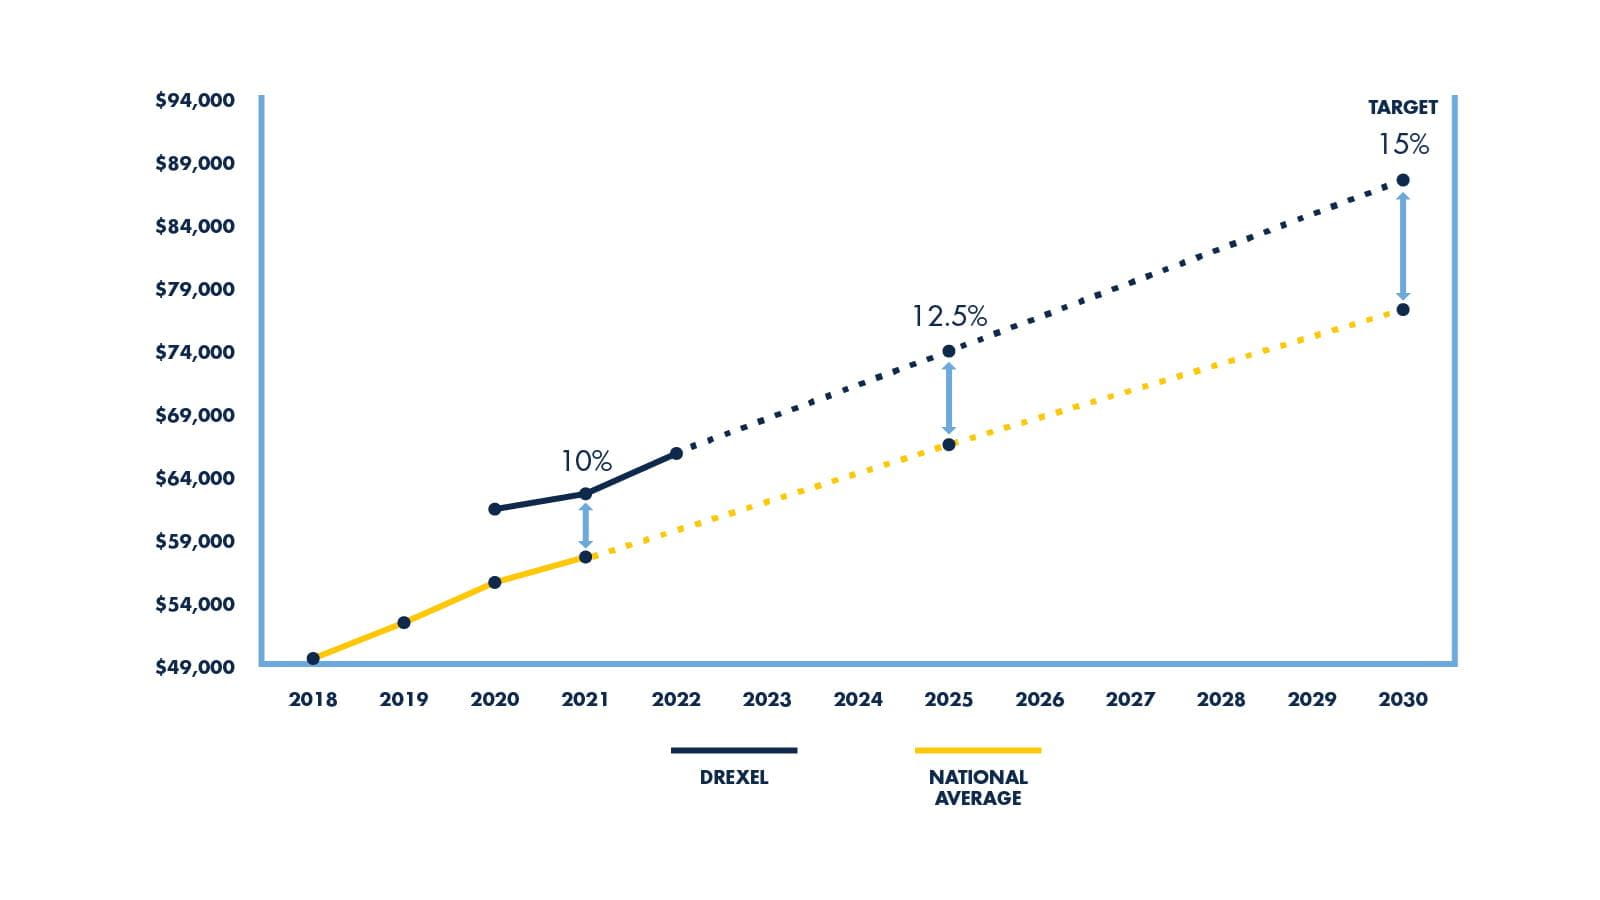 According to the National Association of Colleges and Employers (NACE) September 2022 Salary Survey, post-graduation pay rates of Drexel University students are 10% above the national average.  Through the Student Empowerment imperative, the goal is to increase Drexel University post-graduation pay rates to 15% above the national average by 2030. 